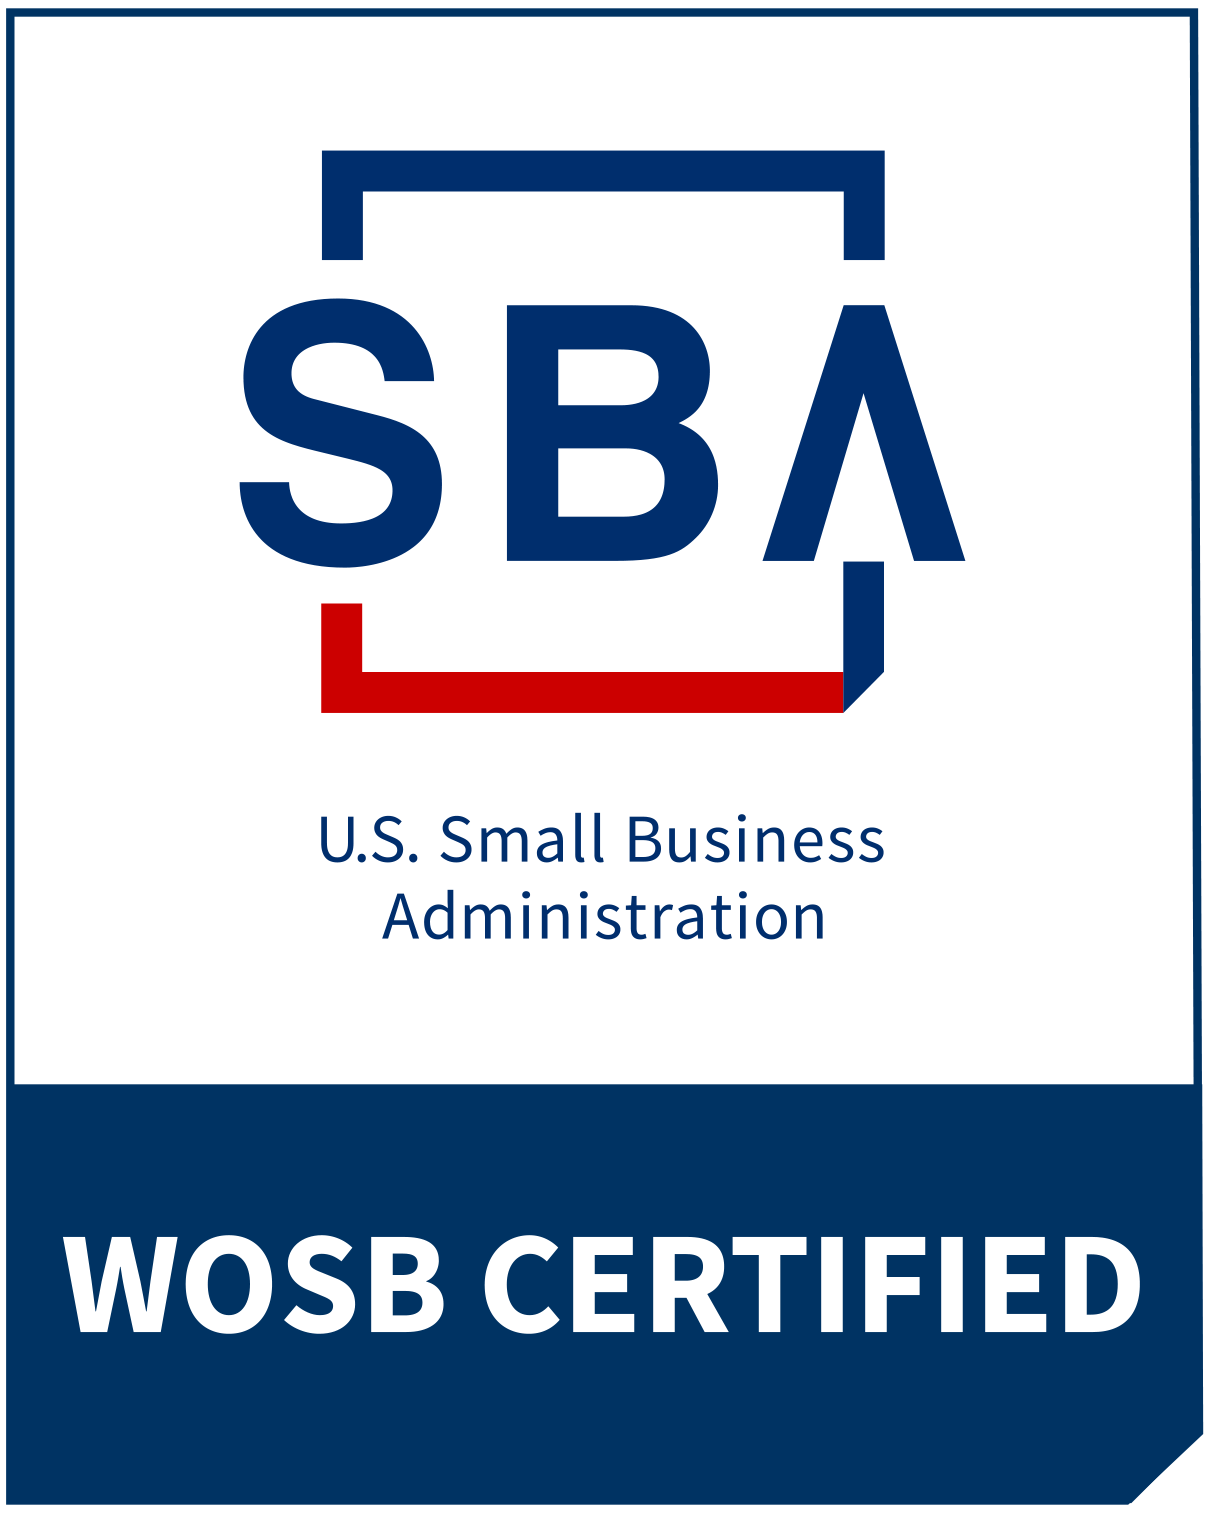 Woman Owned Small Business Certified